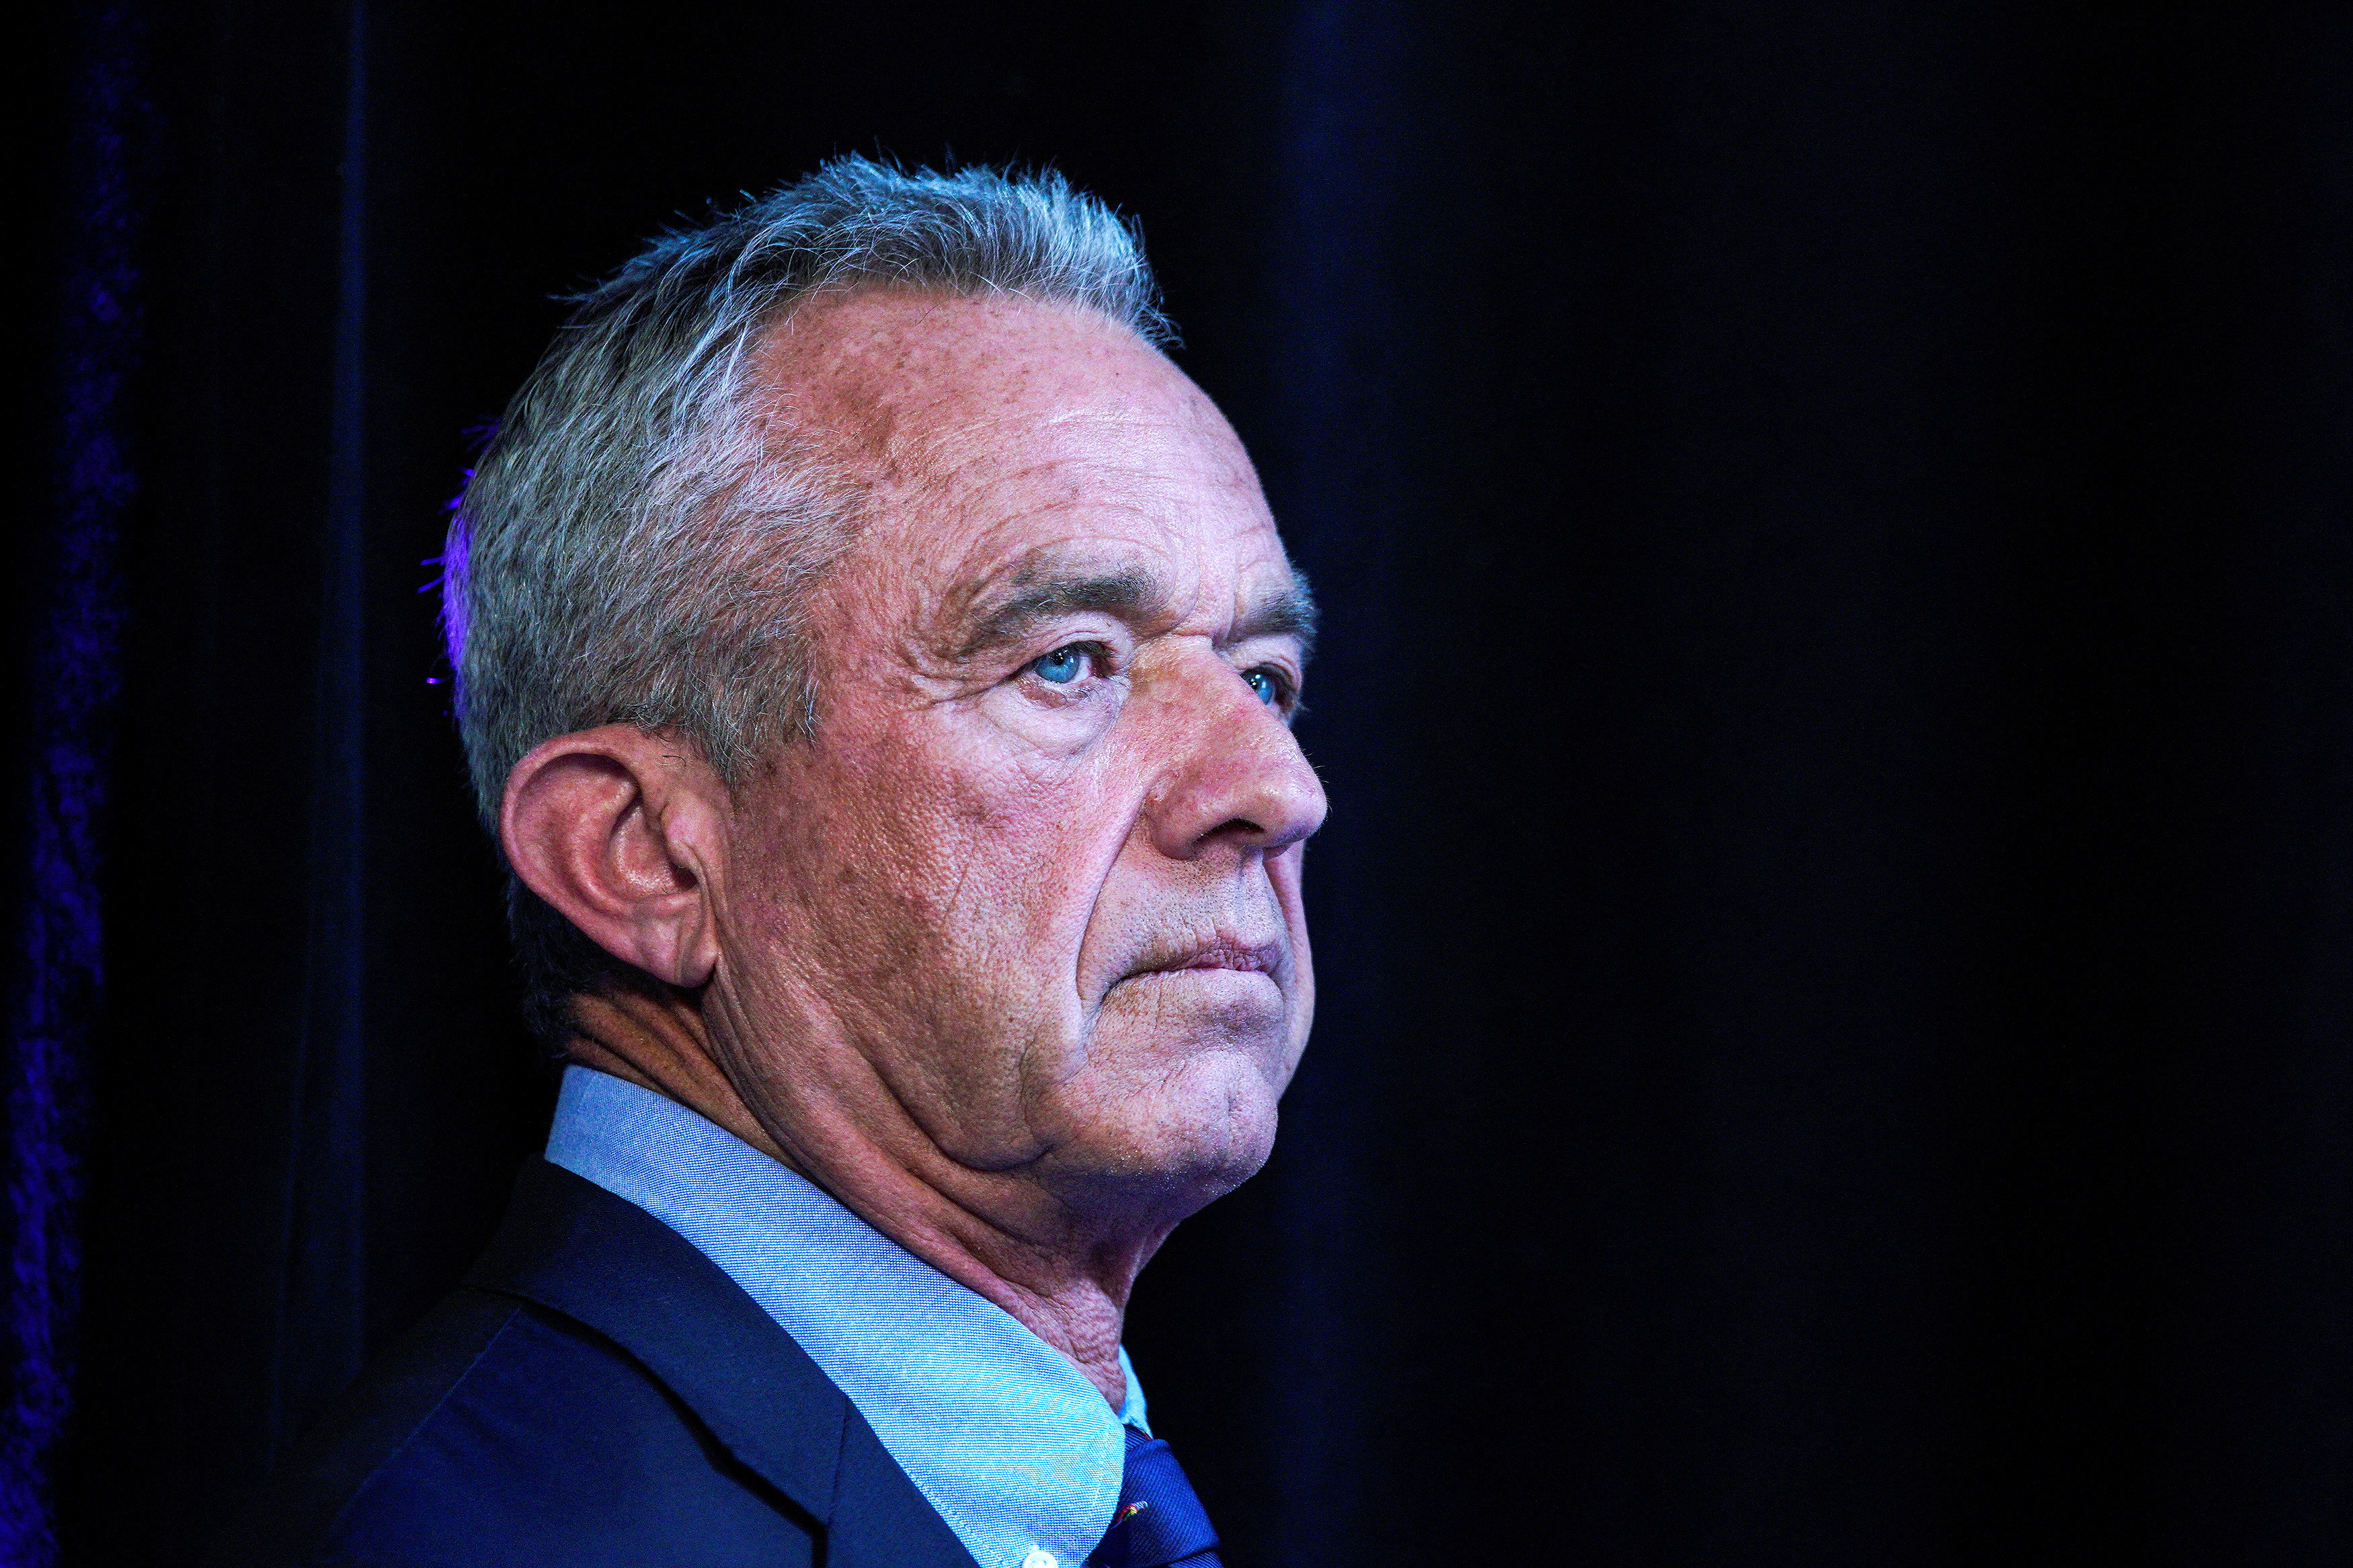 Robert F. Kennedy Jr. to make 'major announcement' in his presidential race